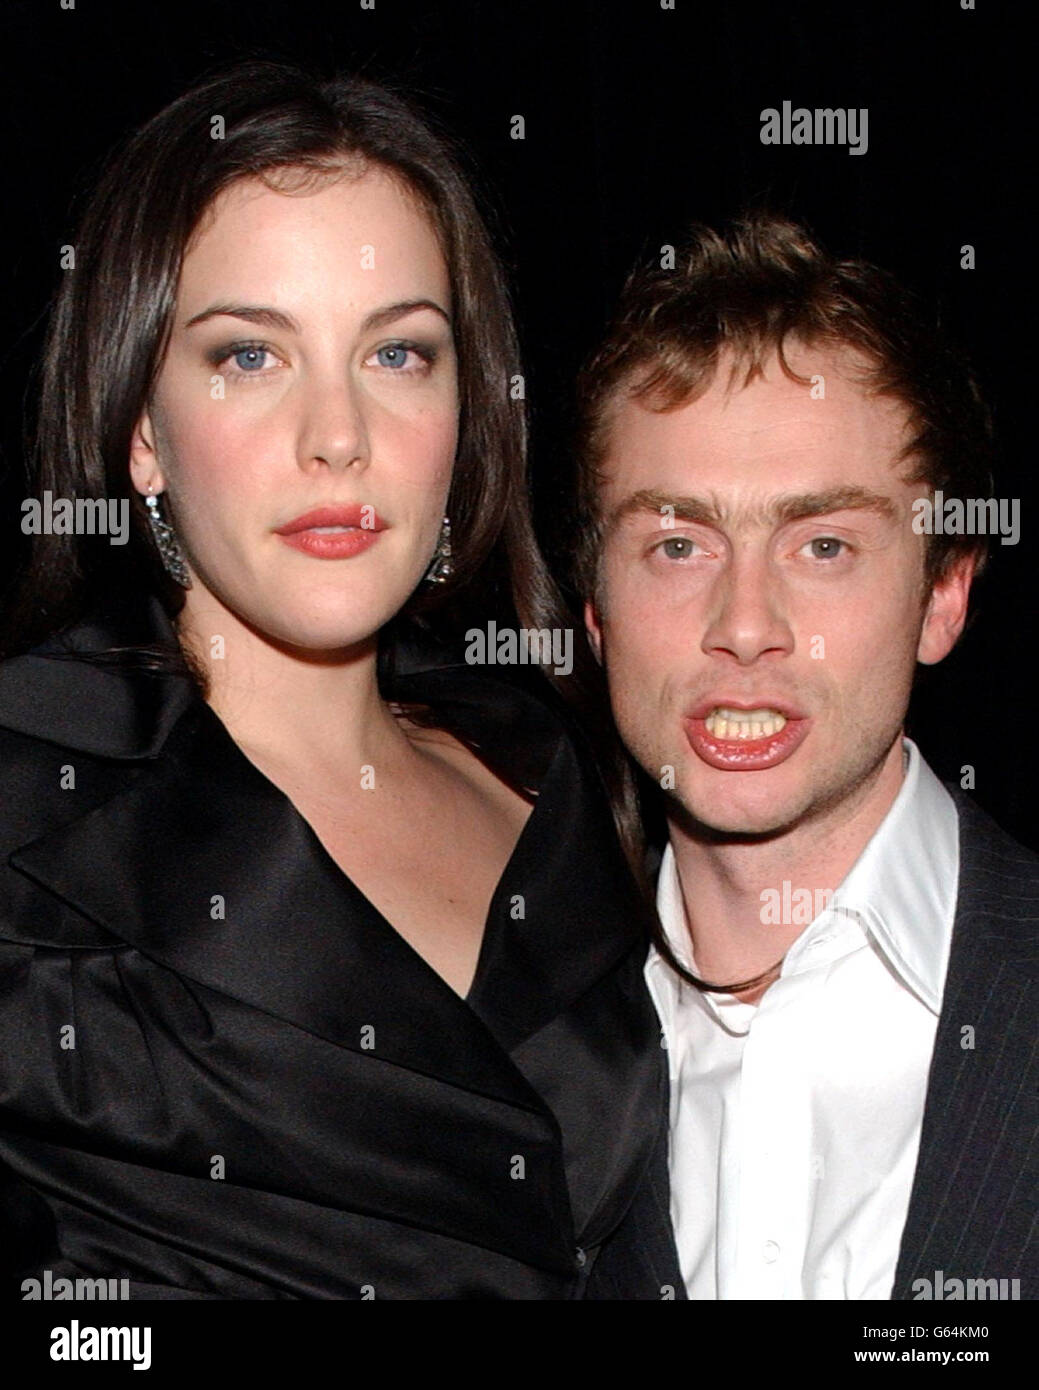 Liv Tyler & Royston Langdon arriving for the aftershow party in Leicester Square, London,following the UK premiere of Lord of the Rings: The Two Towers. Stock Photo